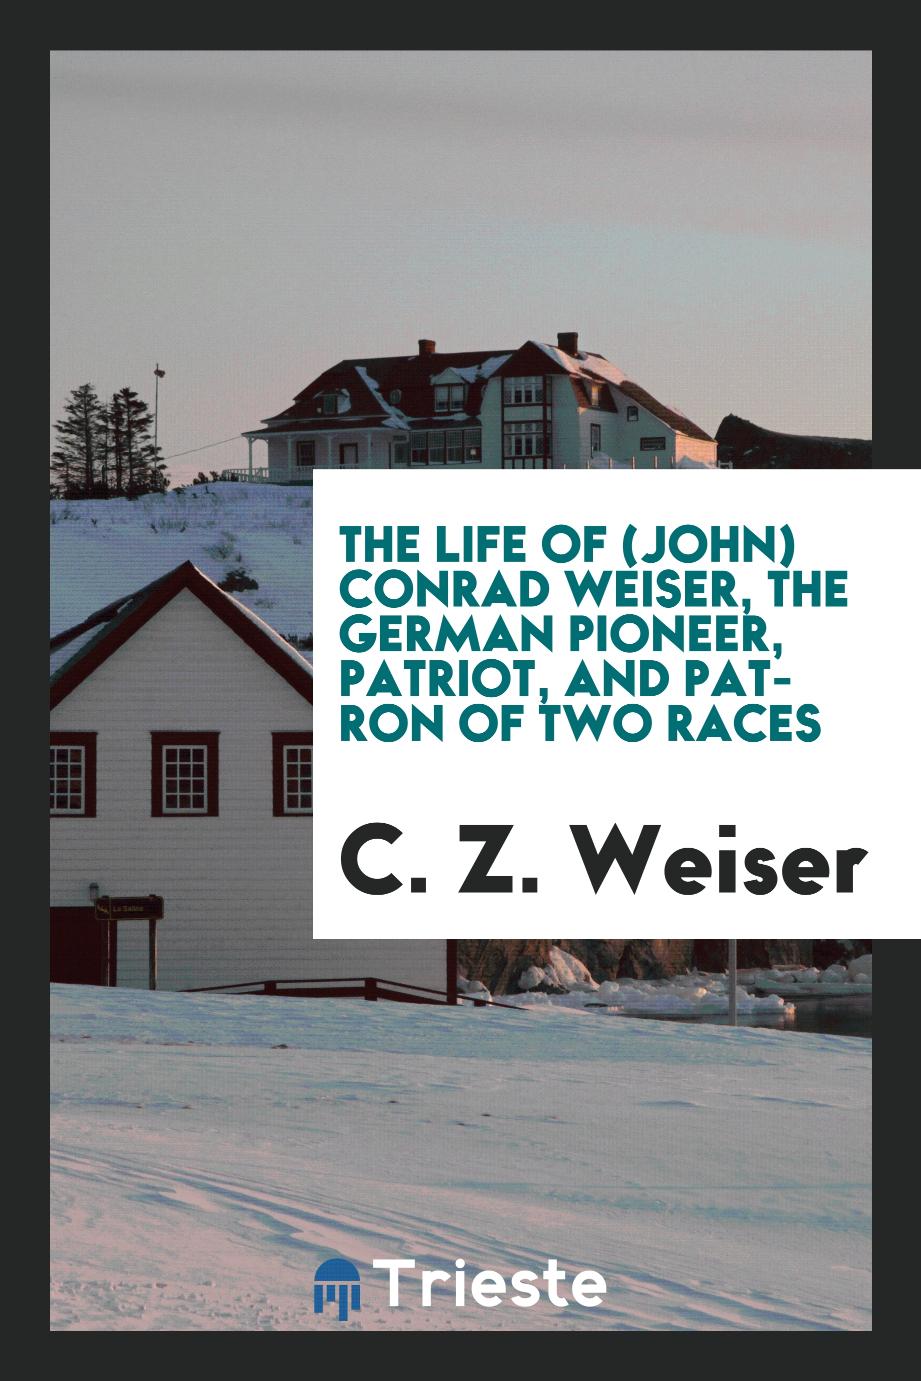 The life of (John) Conrad Weiser, the German pioneer, patriot, and patron of two races